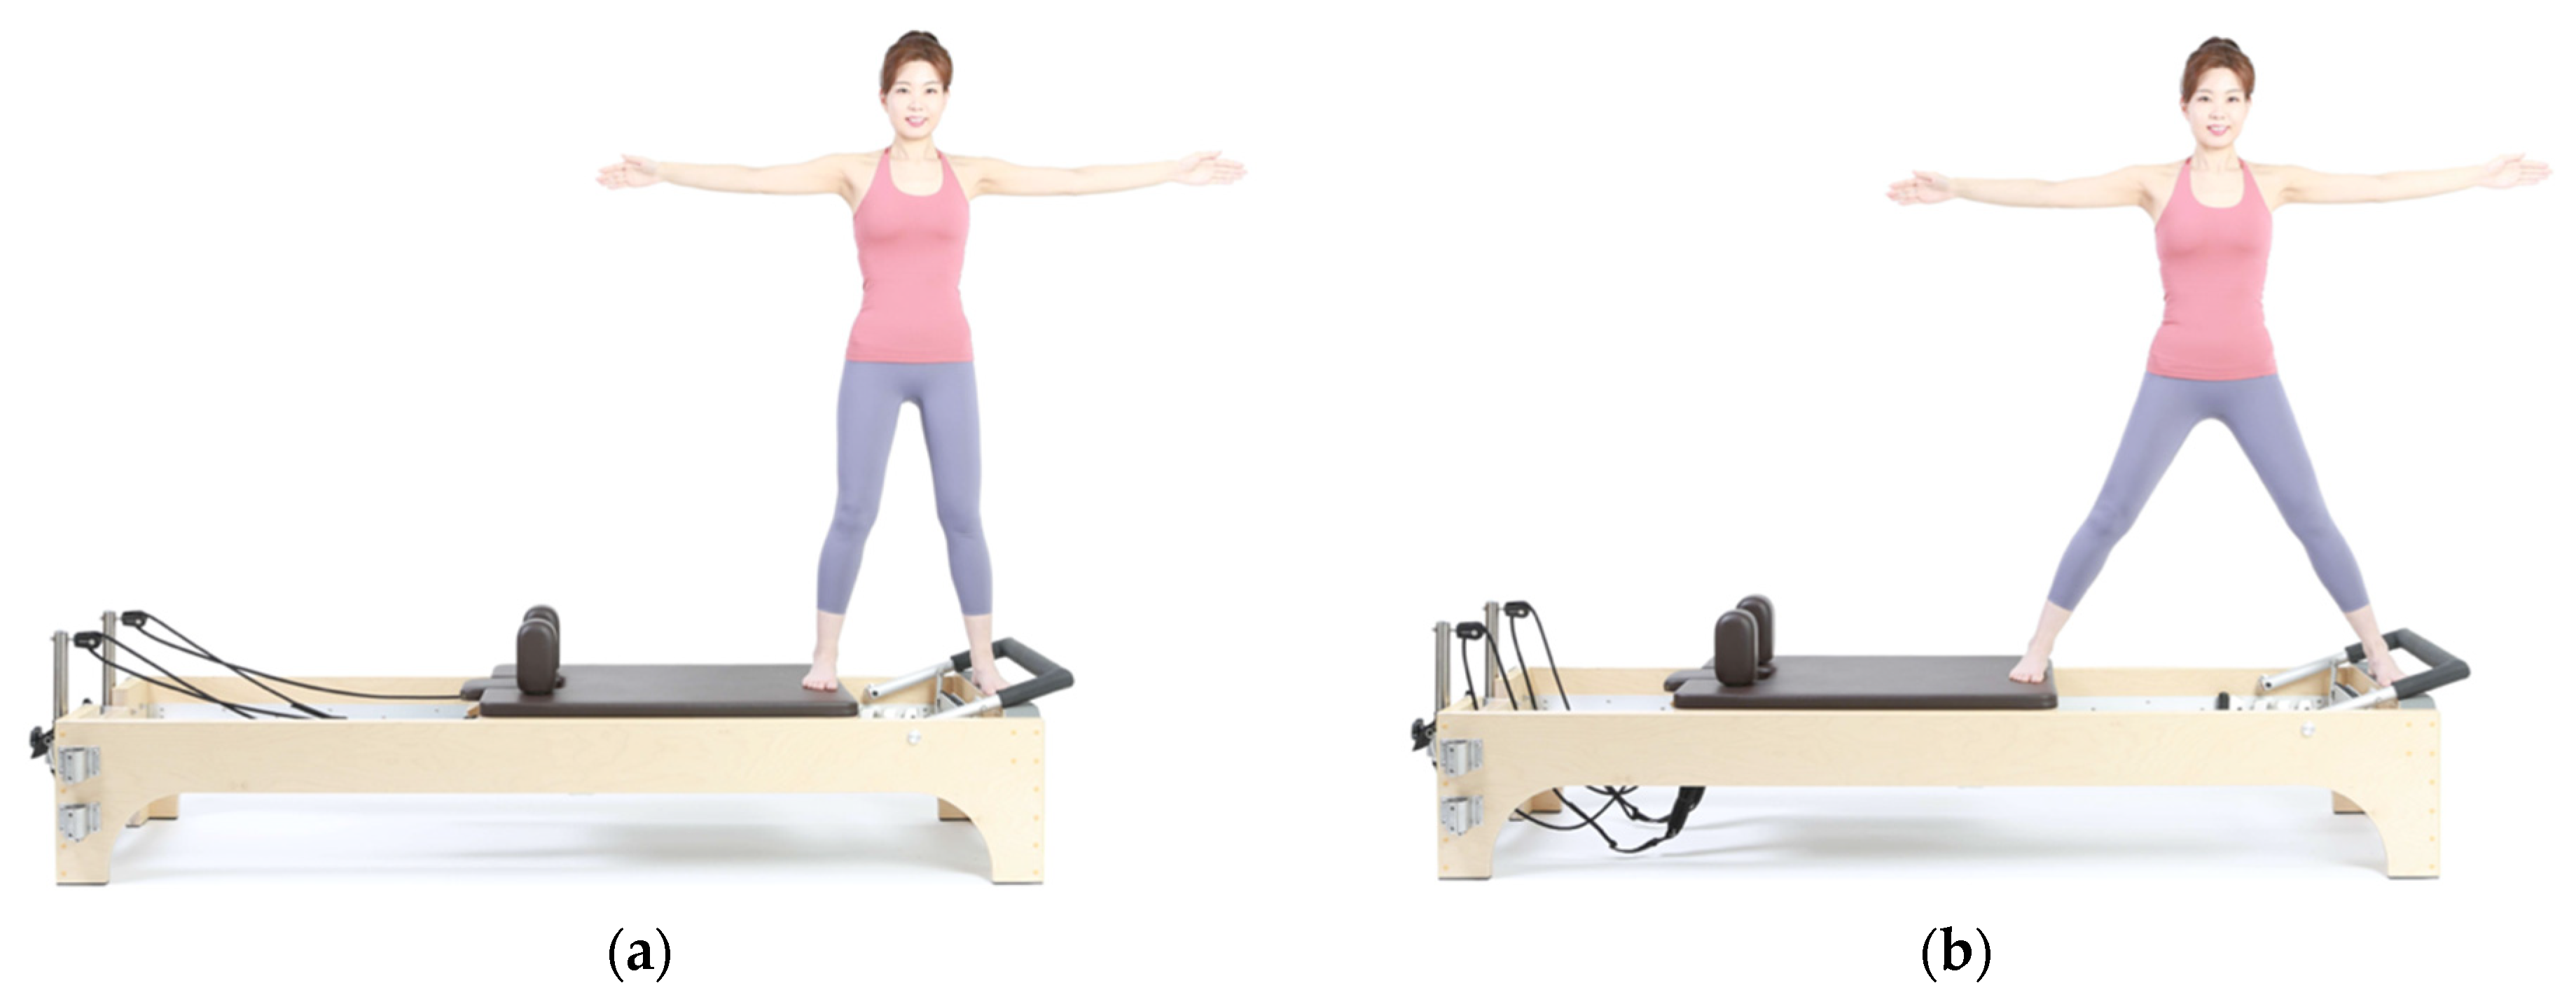 Pilates exercises for building core strength and balance - Pure